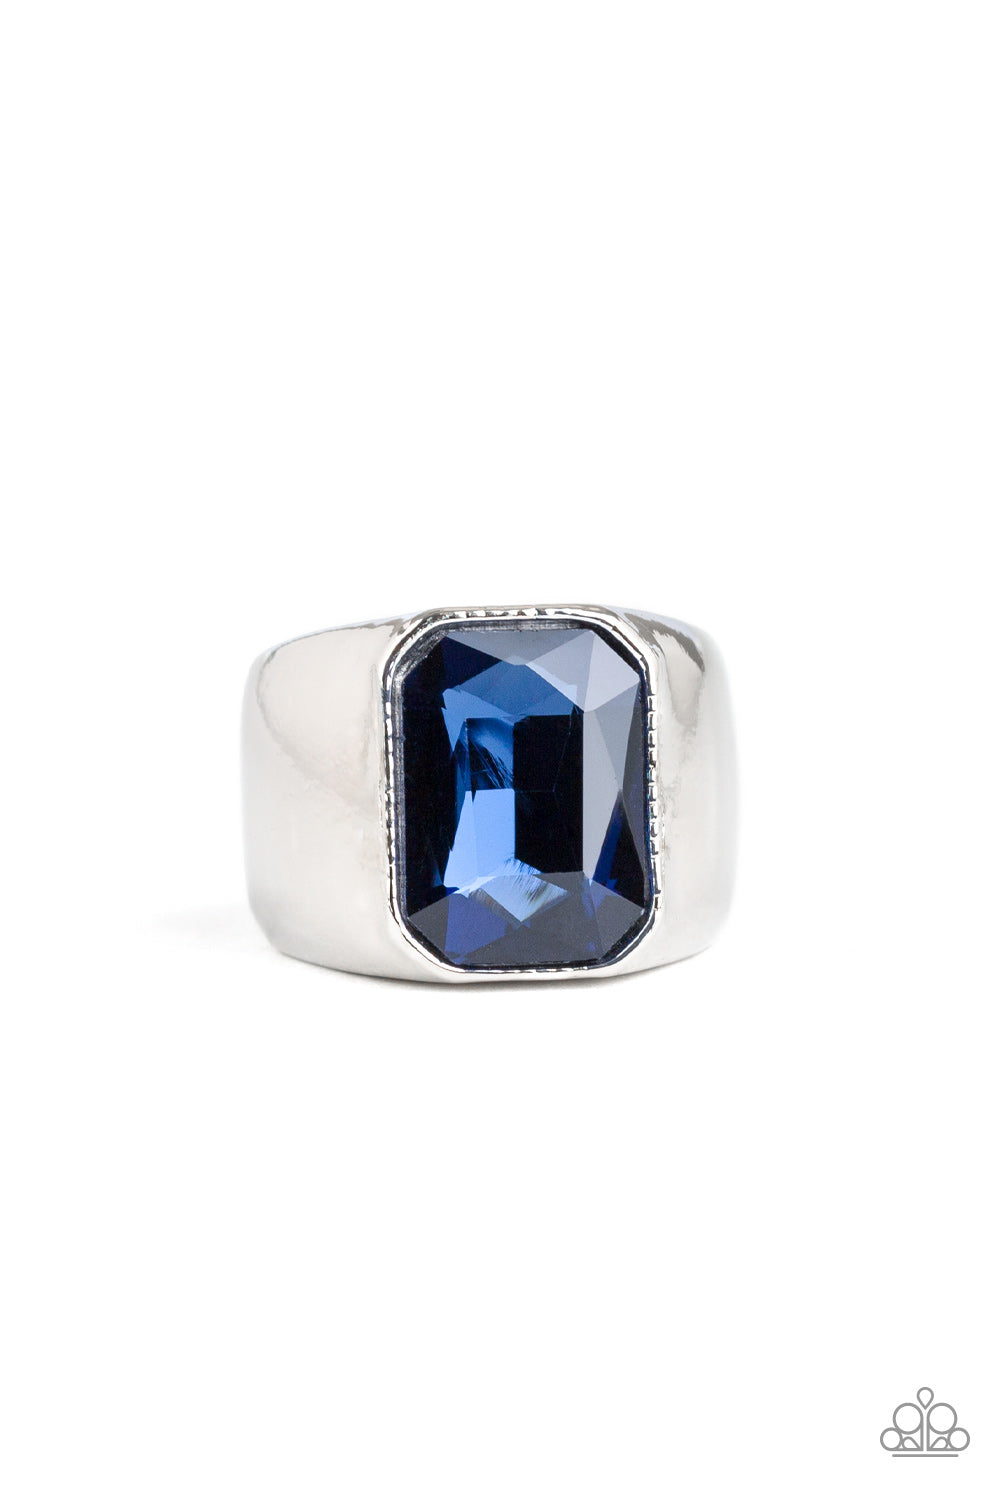 Scholar - Blue Featuring a kingly emerald style cut, an oversized blue rhinestone is pressed into the center of a glistening silver band for a statement look. Features a stretchy band for a flexible fit.  Sold as one individual ring.